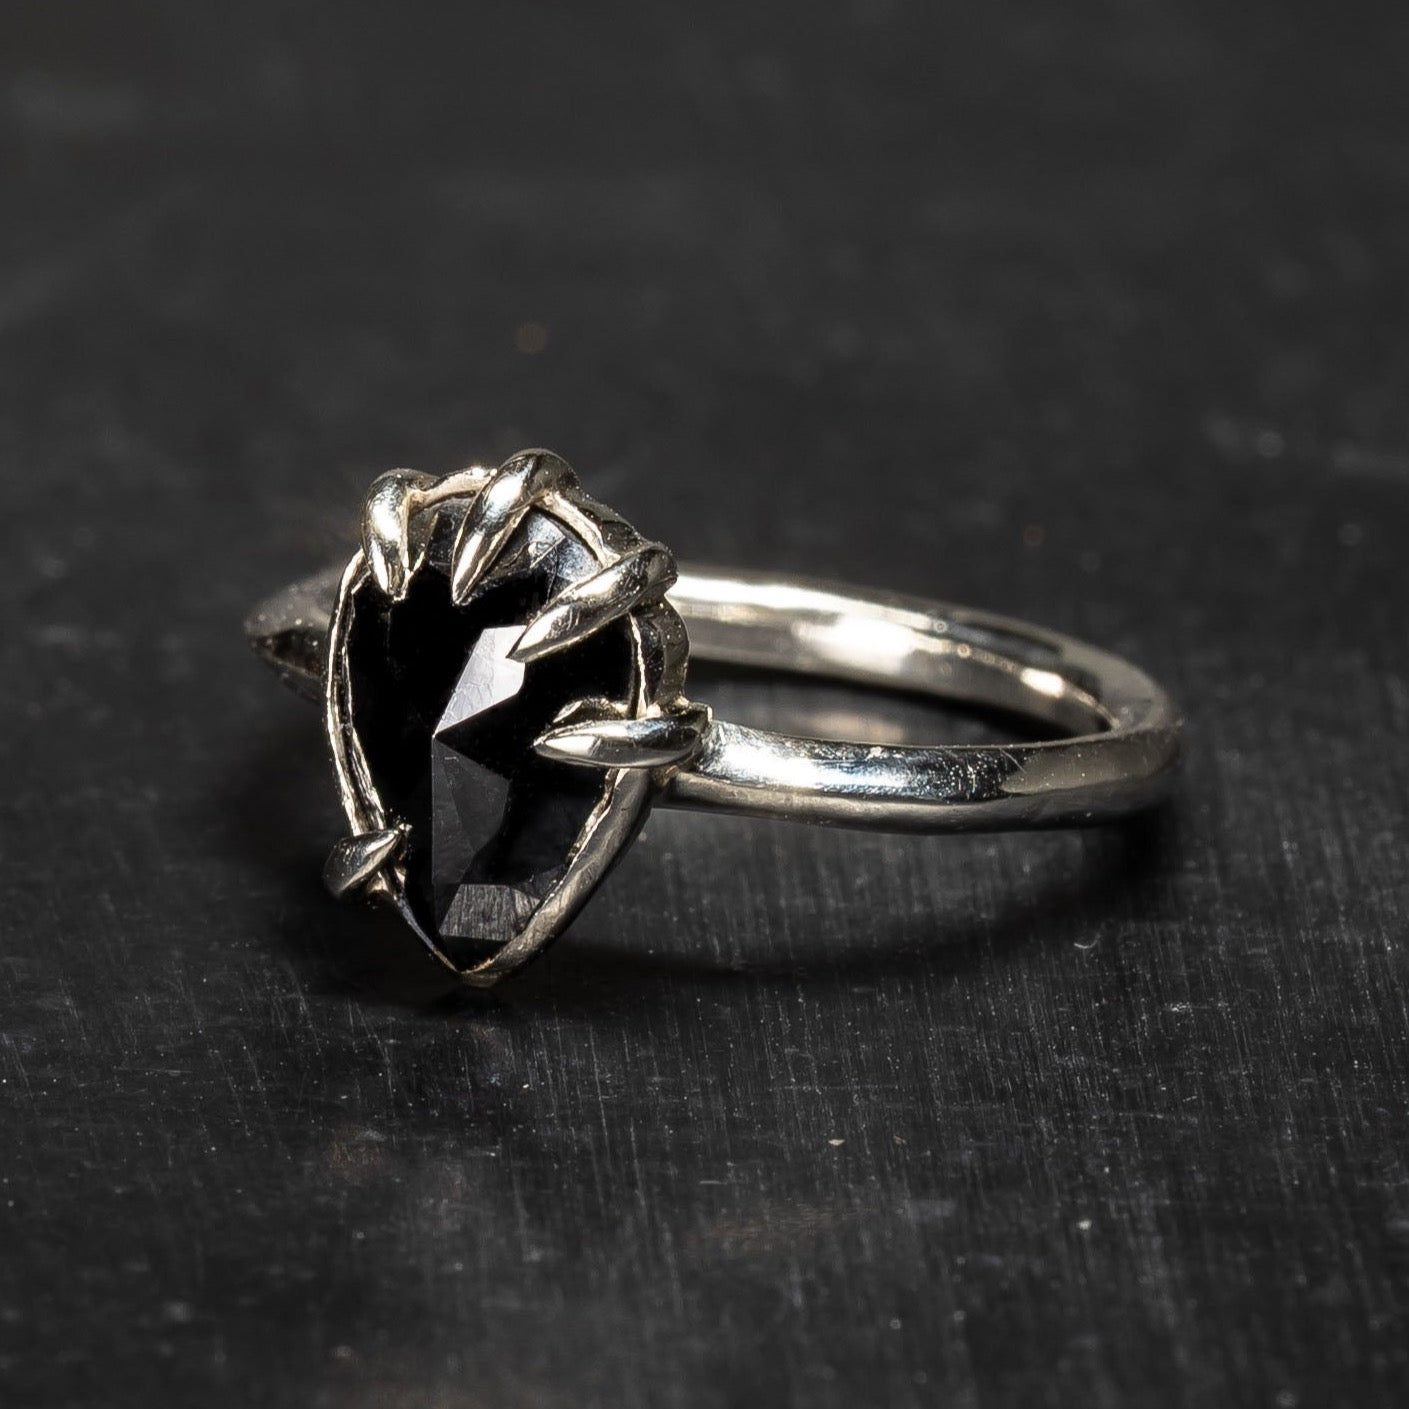 Darkly beloved collection engagement ring with pear shaped diamond